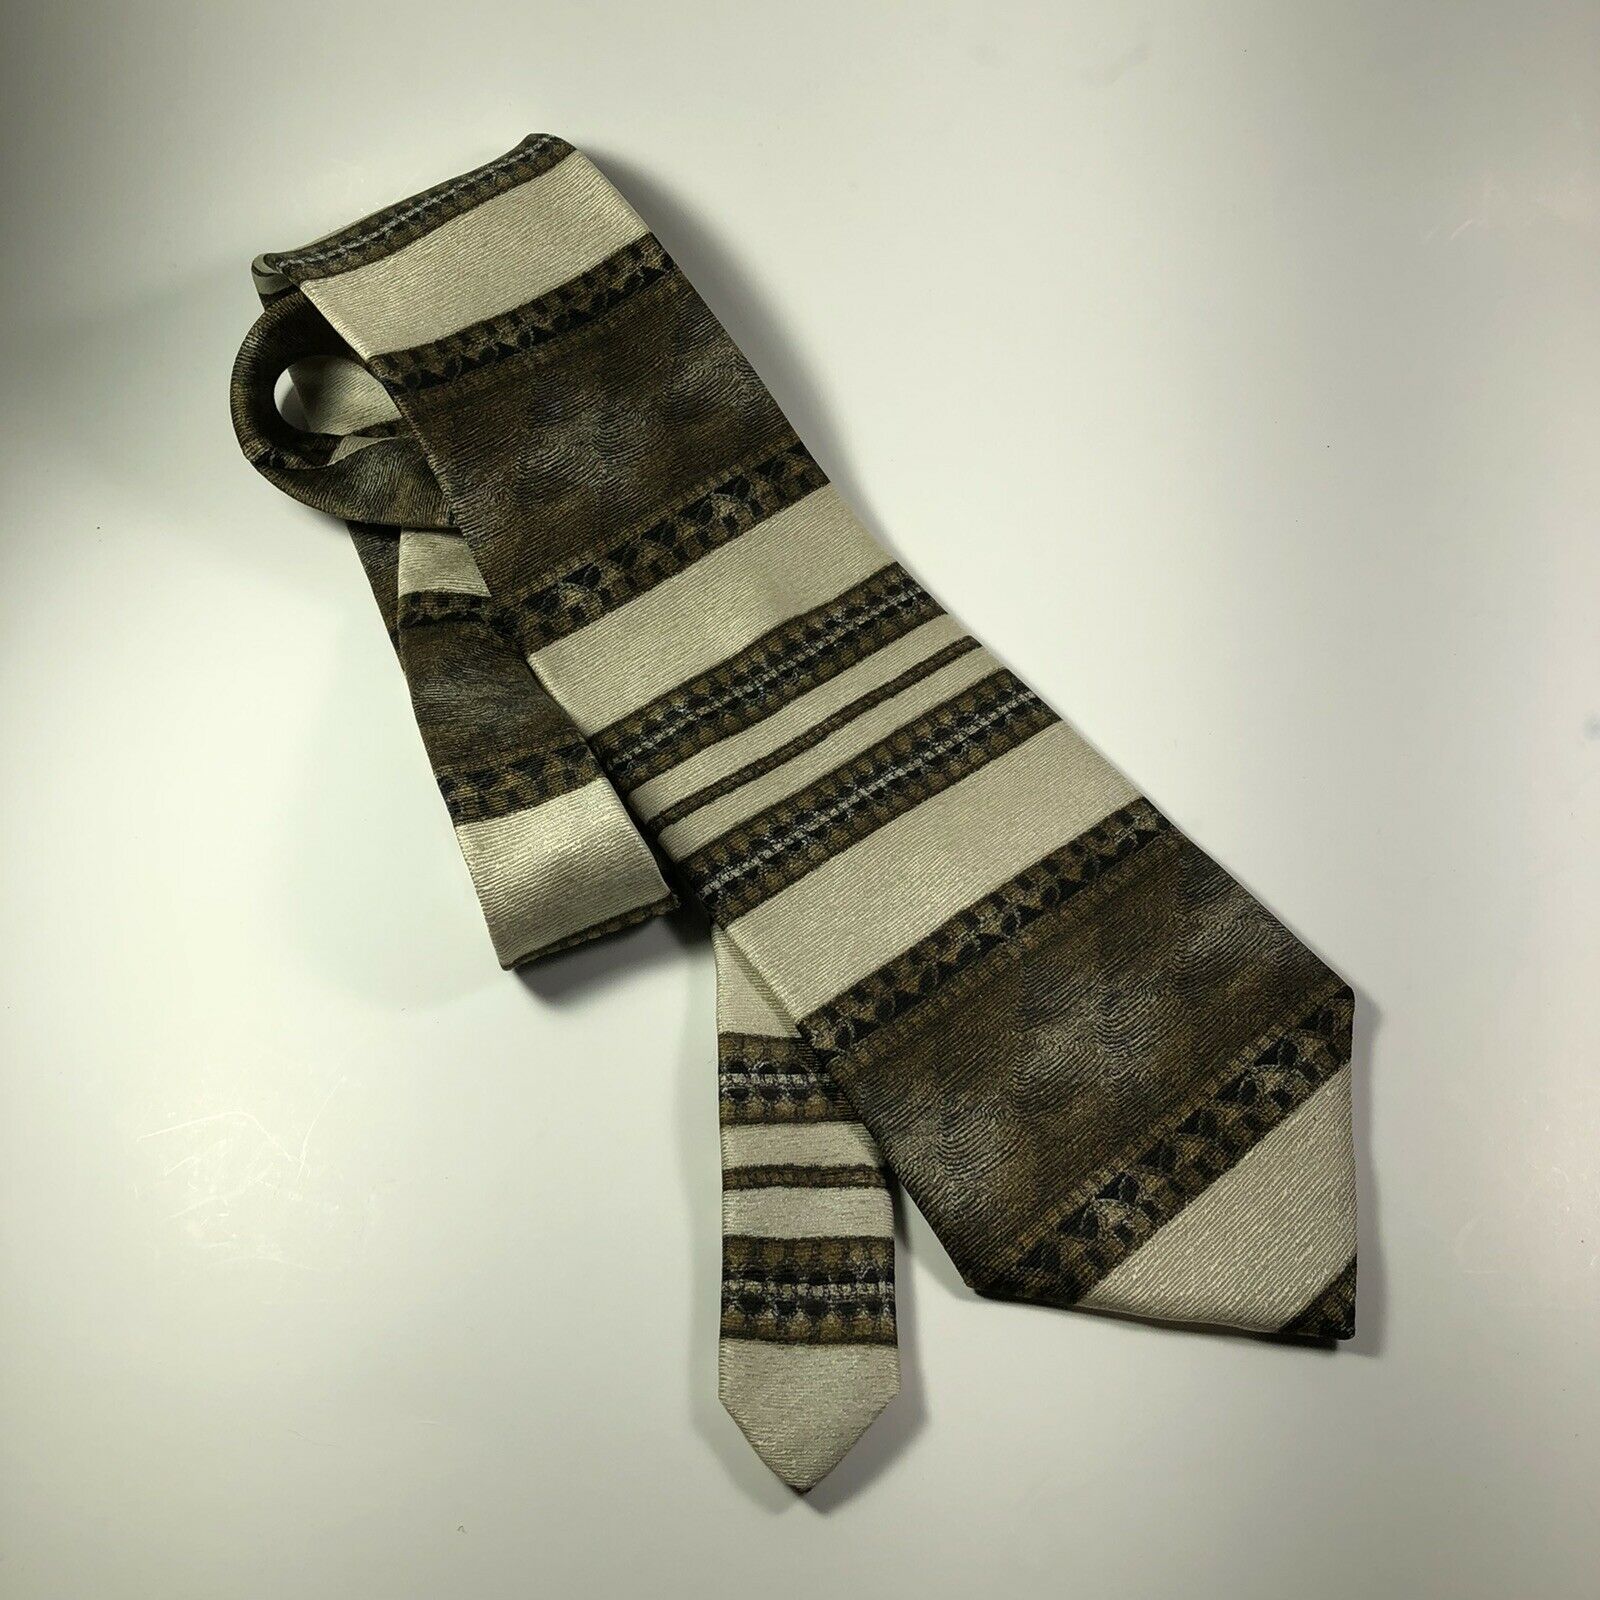 Primary image for Mulberry Neck Tie 100% Silk Hand Sewn In Italy Brown & Gold Stripe Made in USA